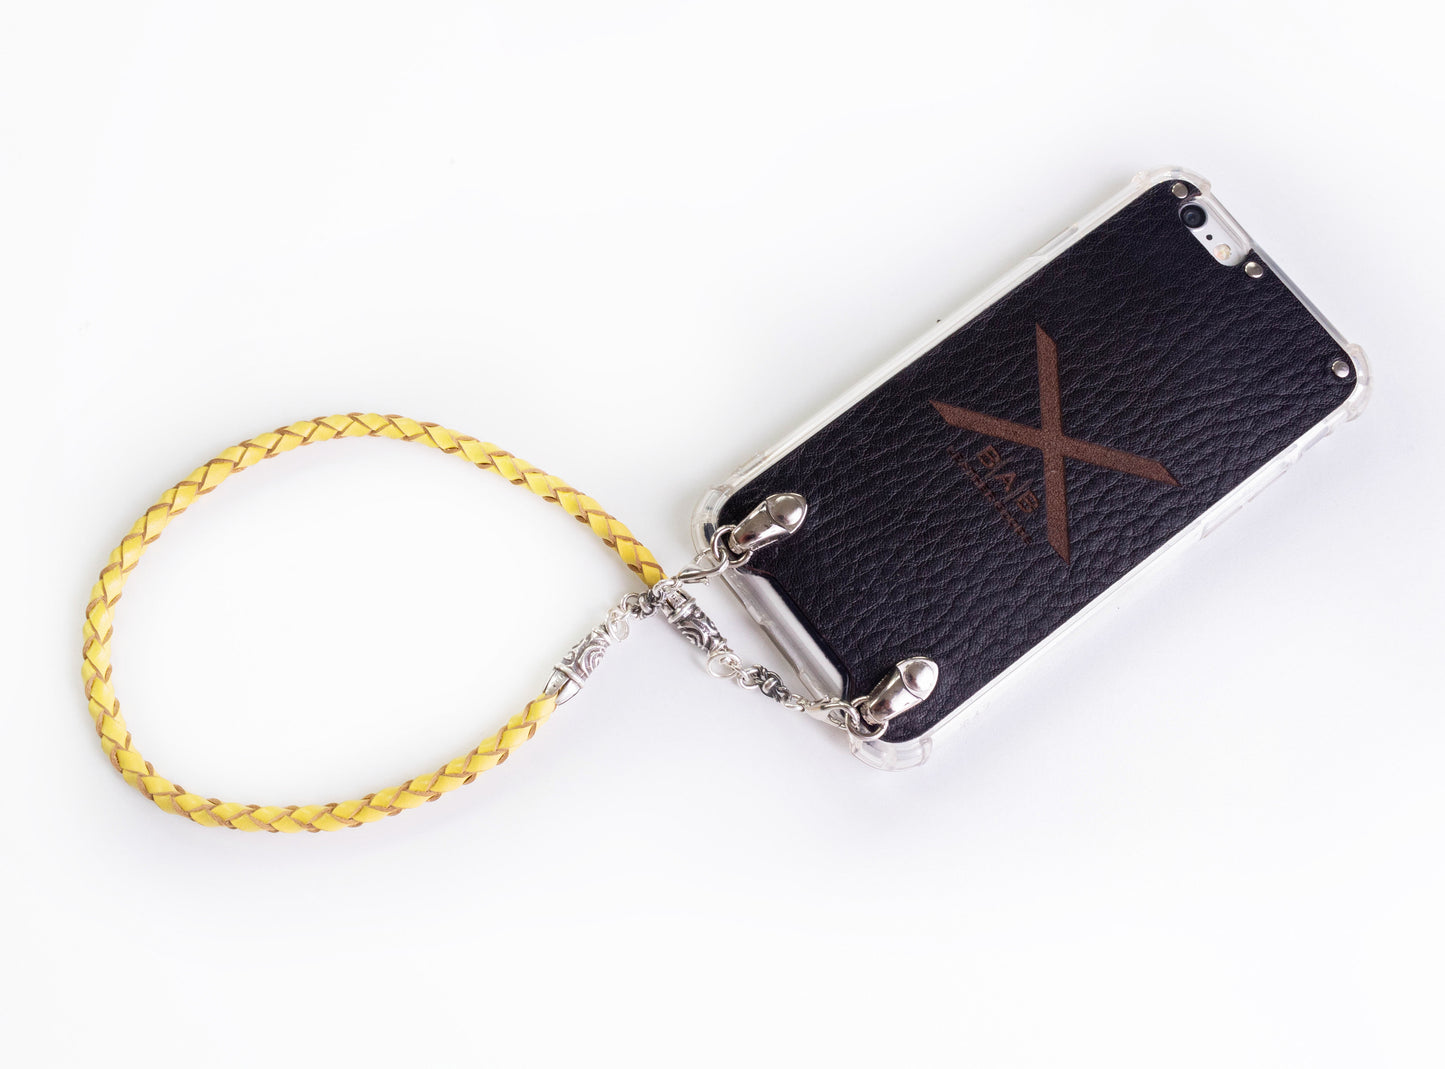 Full-Grain Genuine vegetable-tanned Leather & 925 Sterling Silver Case for iPhone. Yellow Genuine Leather Bracelet/Choker/Strap 4 strands hand-braided.- F22